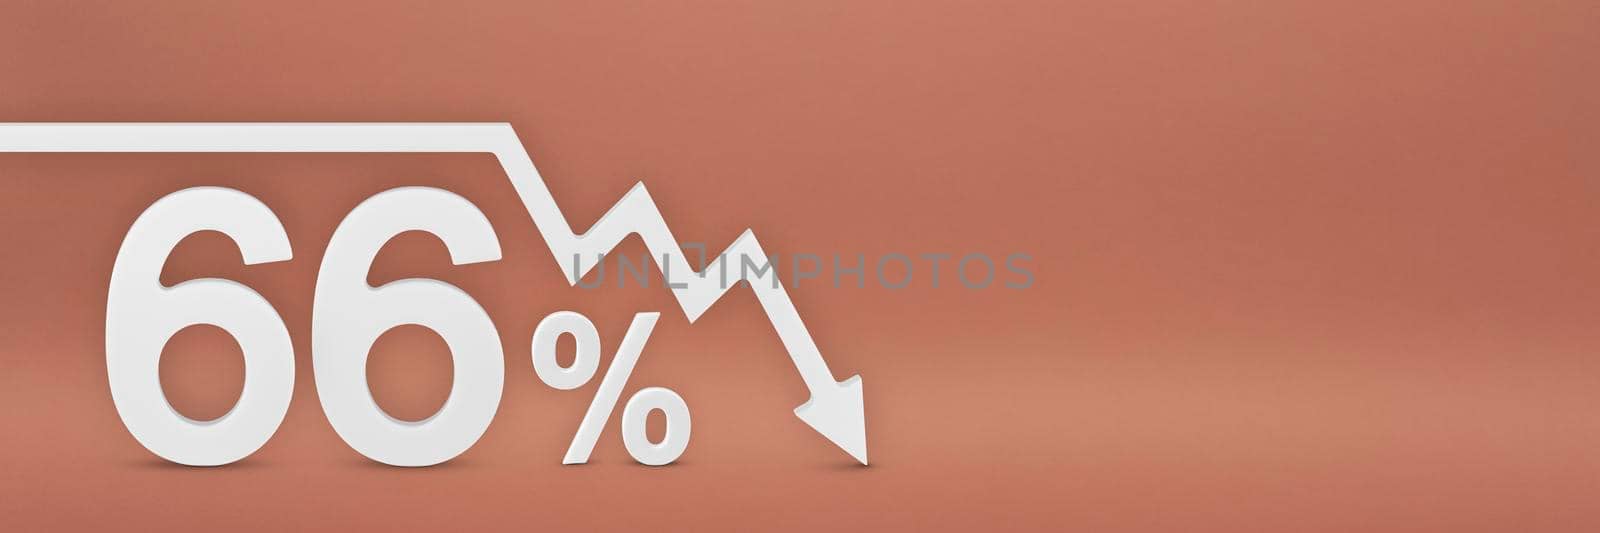 sixty-six percent, the arrow on the graph is pointing down. Stock market crash, bear market, inflation.Economic collapse, collapse of stocks.3d banner,66 percent discount sign on a red background. by SERSOL